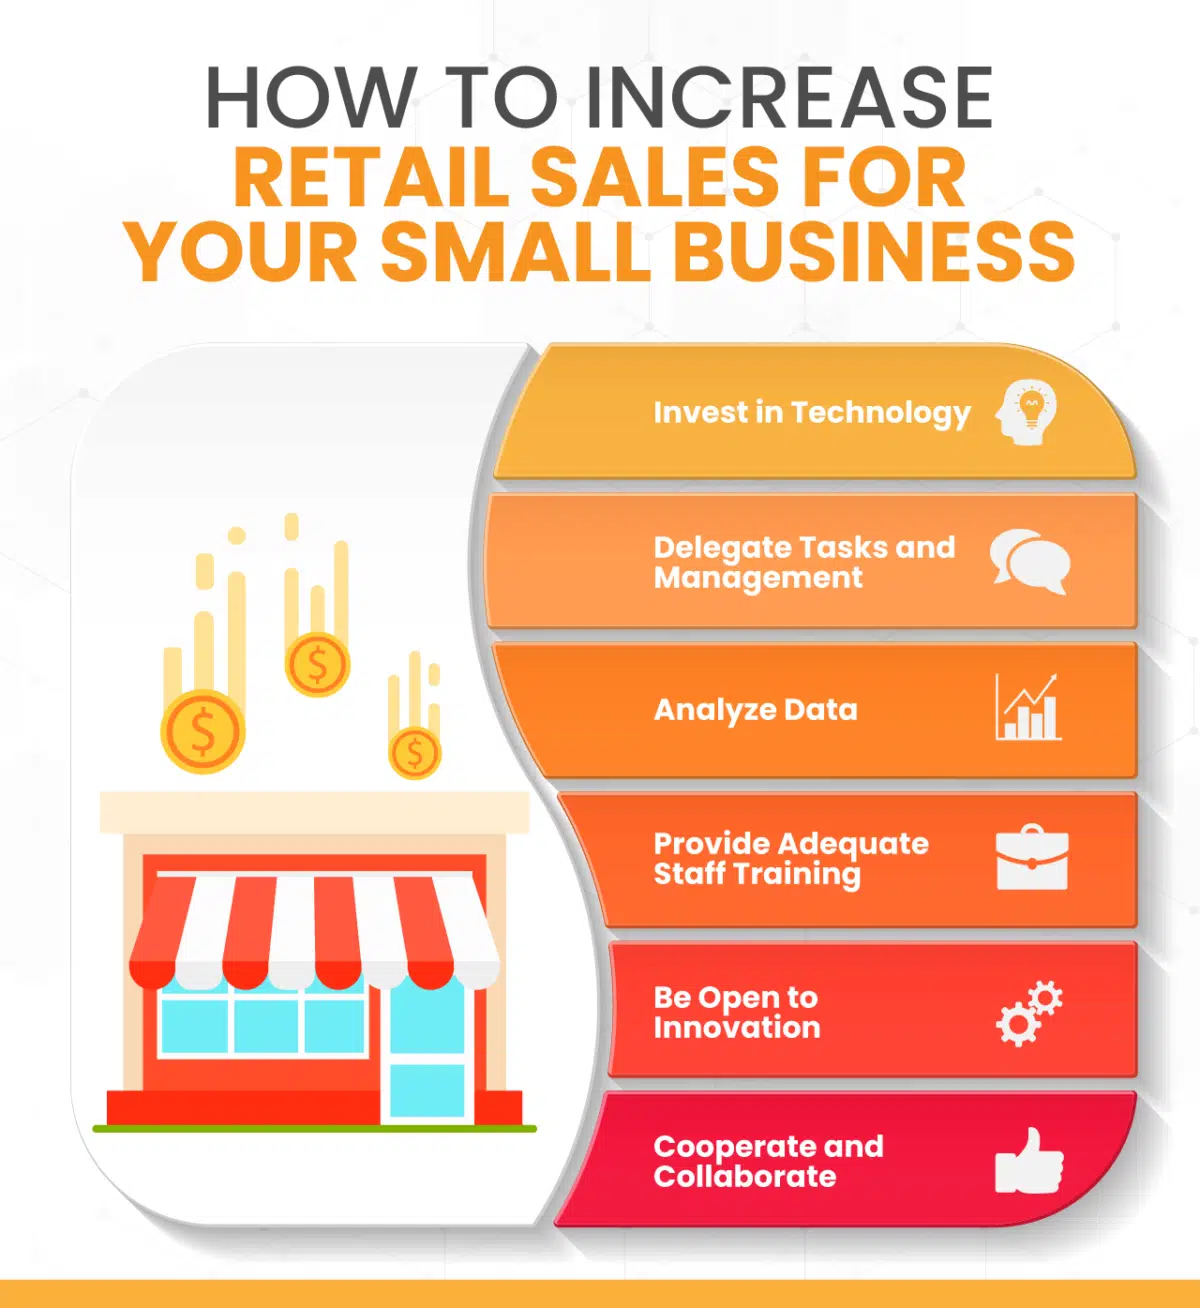 a graphic showing how to increase retail sales for your small business